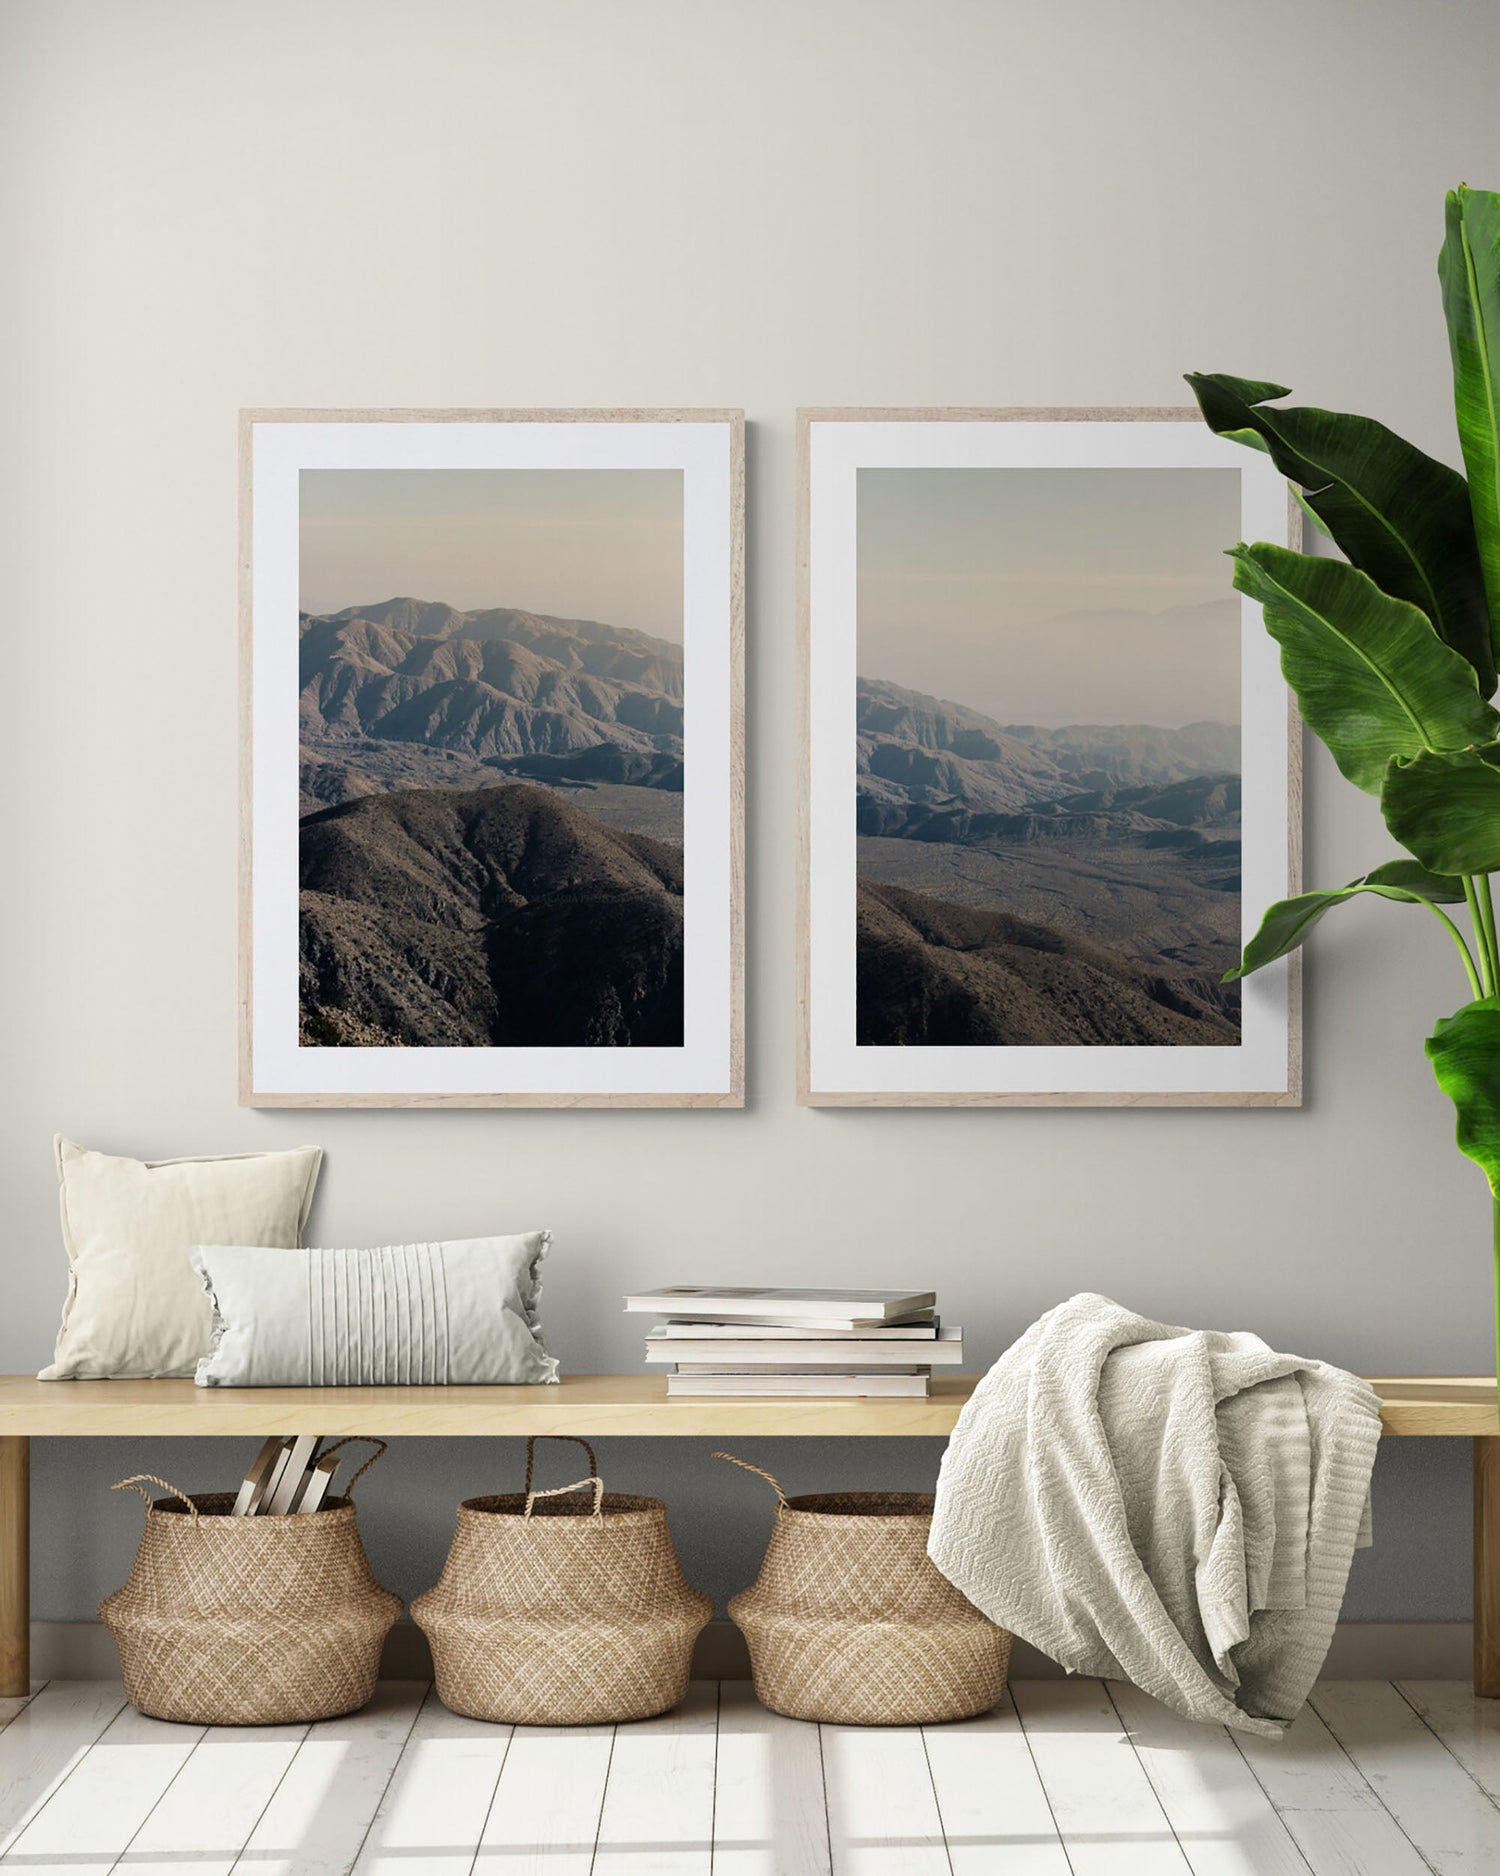 Set of 2 Photographs of the San Andreas Fault and California Mountains in an Entryway Wall as Wall Art